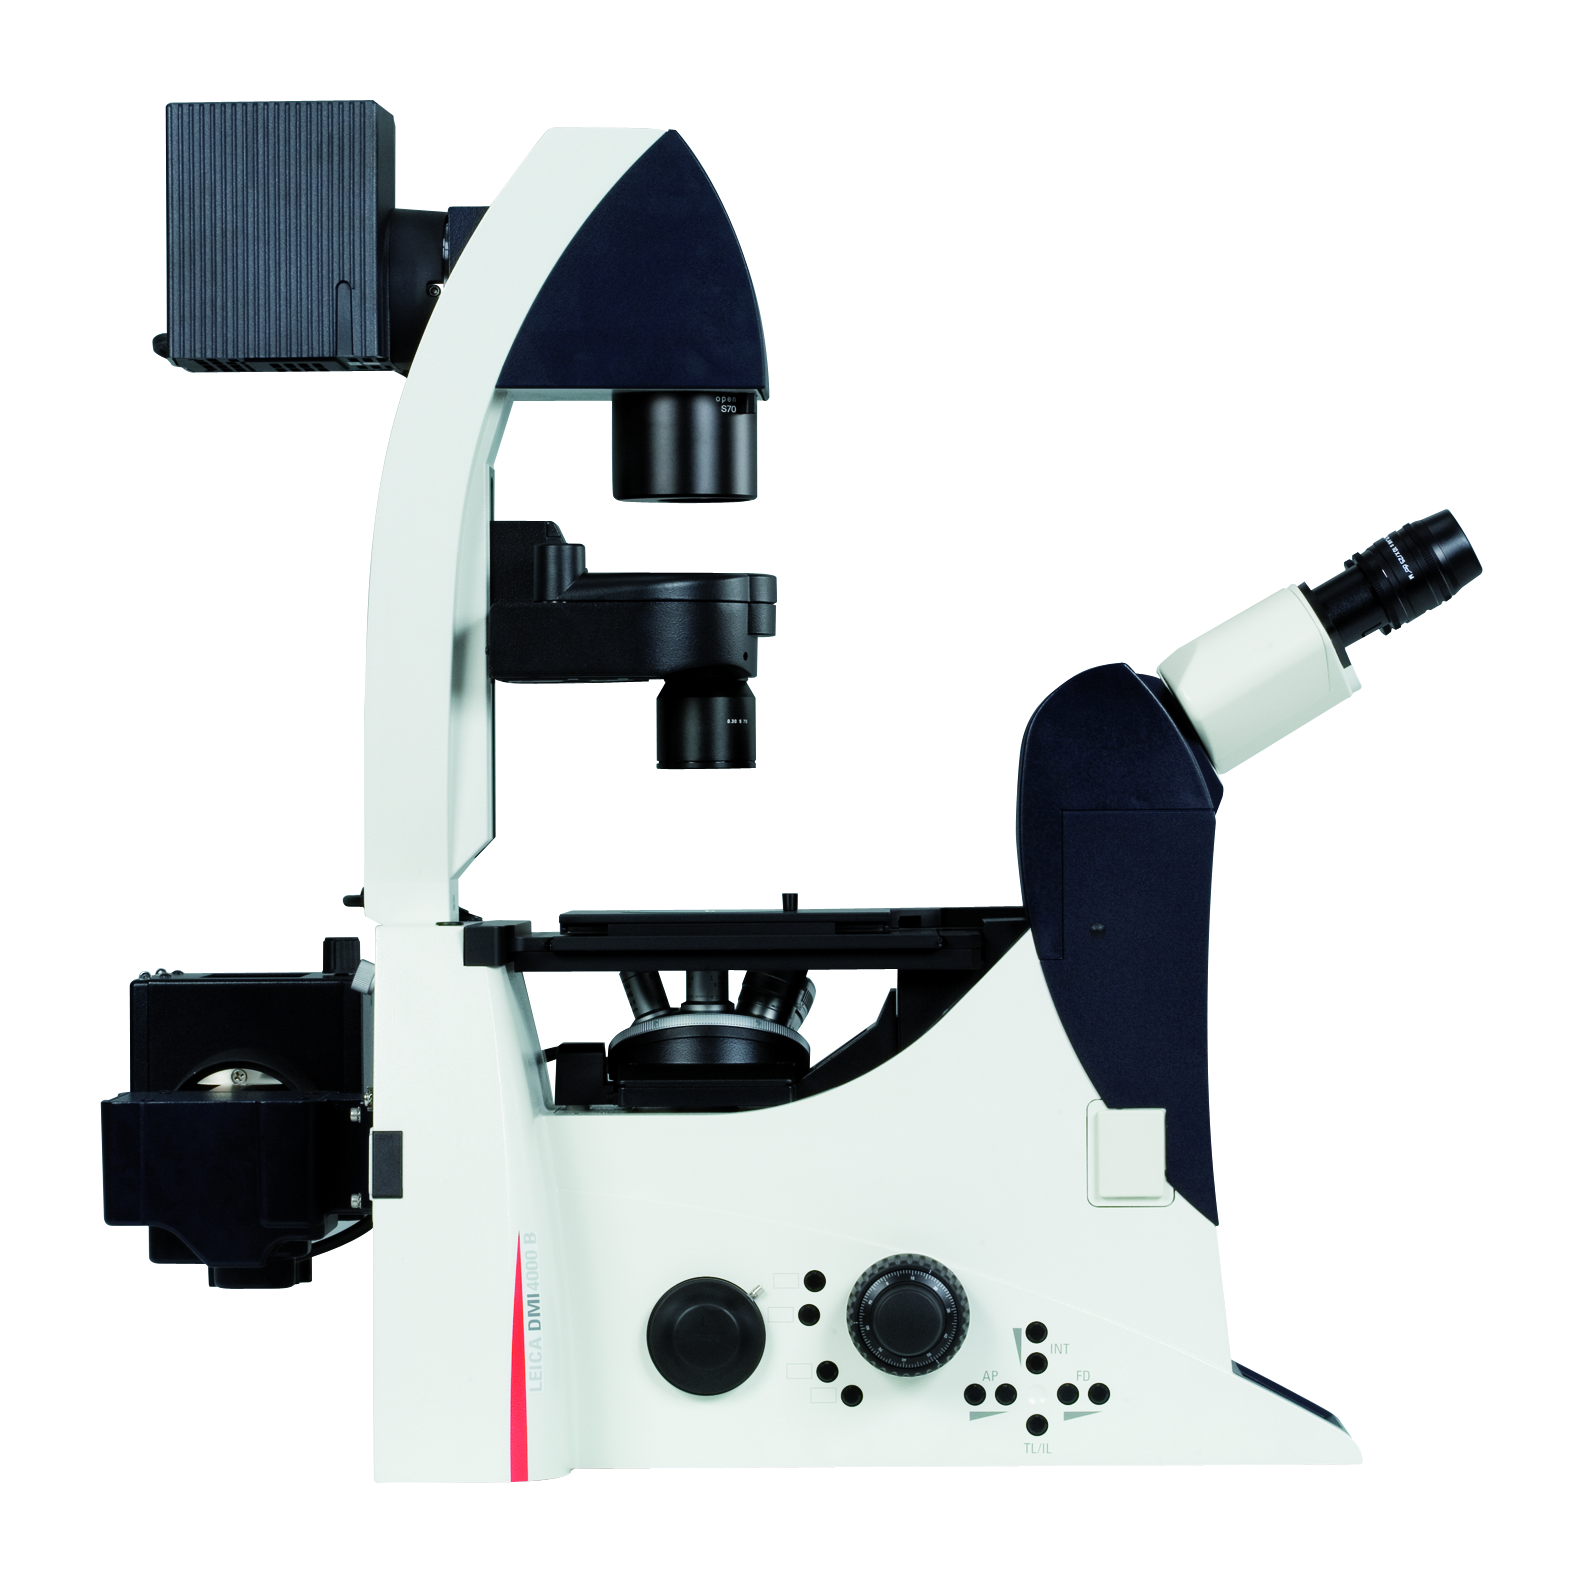 The Leica DMI4000 B can be combined with a variety of accessories to customize an imaging system for a specific user and application.